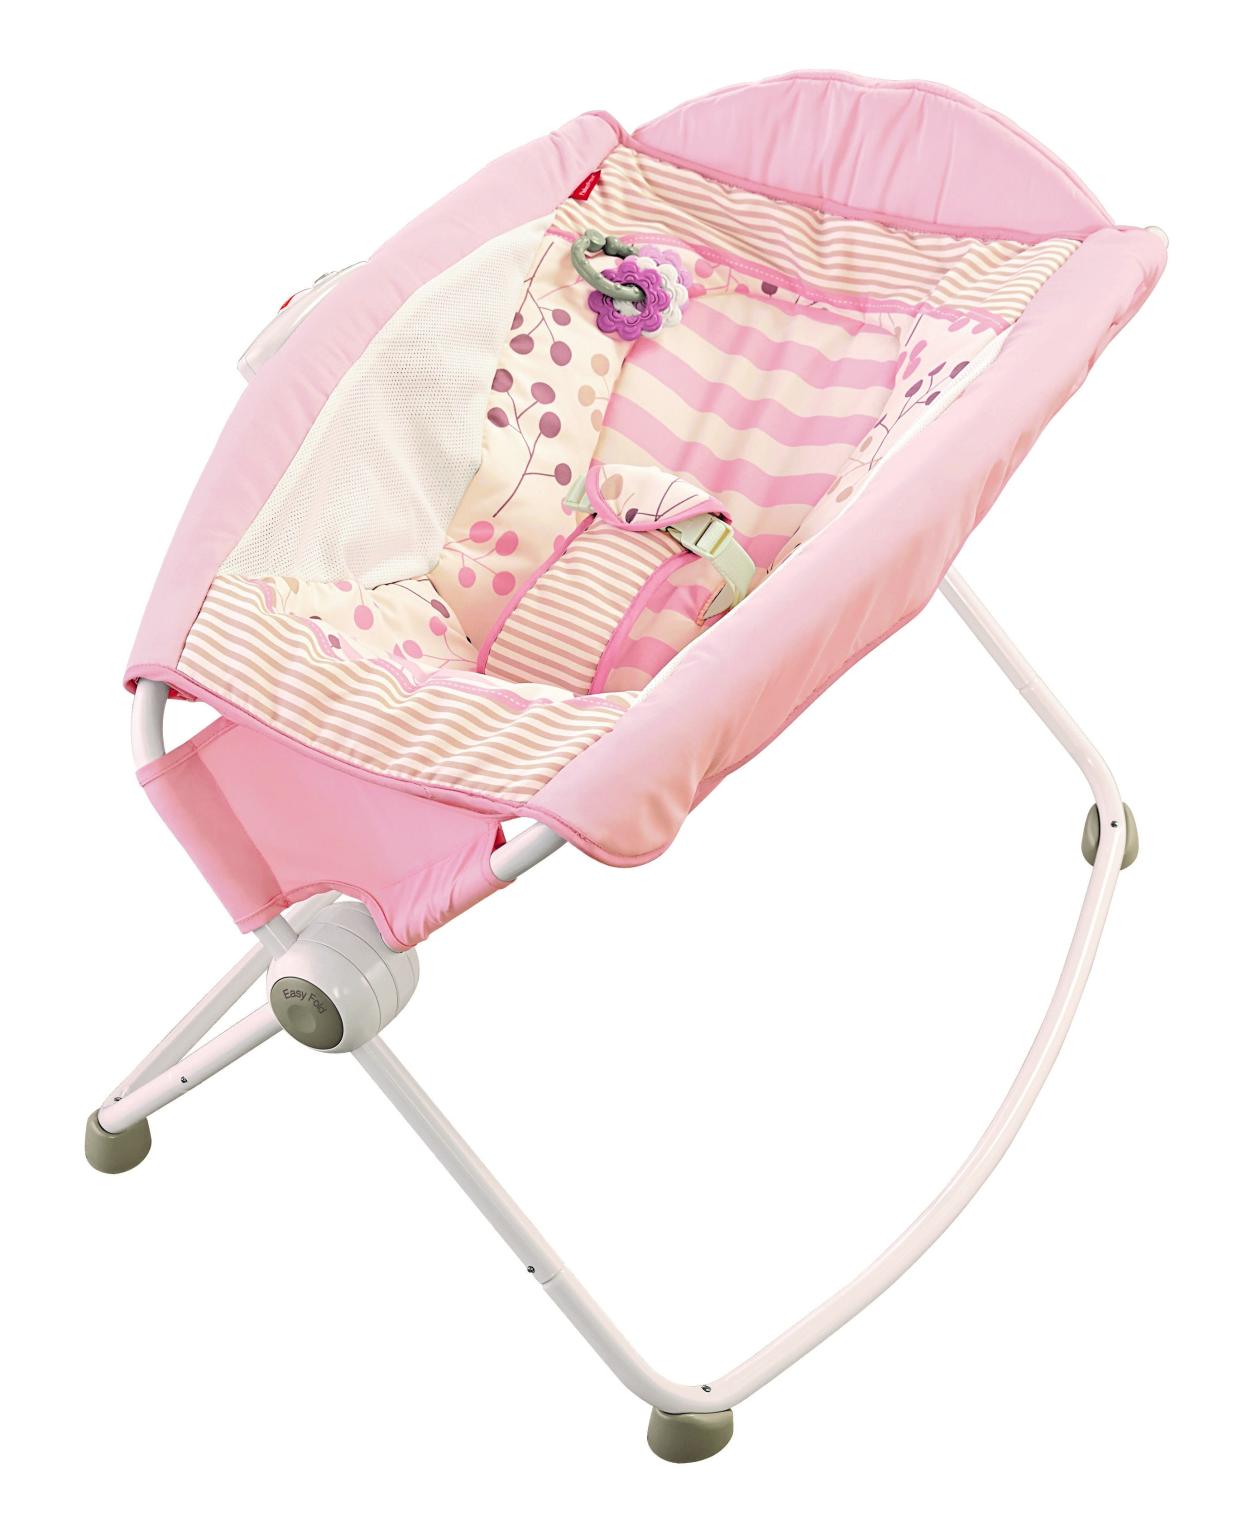 The Fisher-Price Rock 'n Play Sleeper was recalled after reports of several deaths.